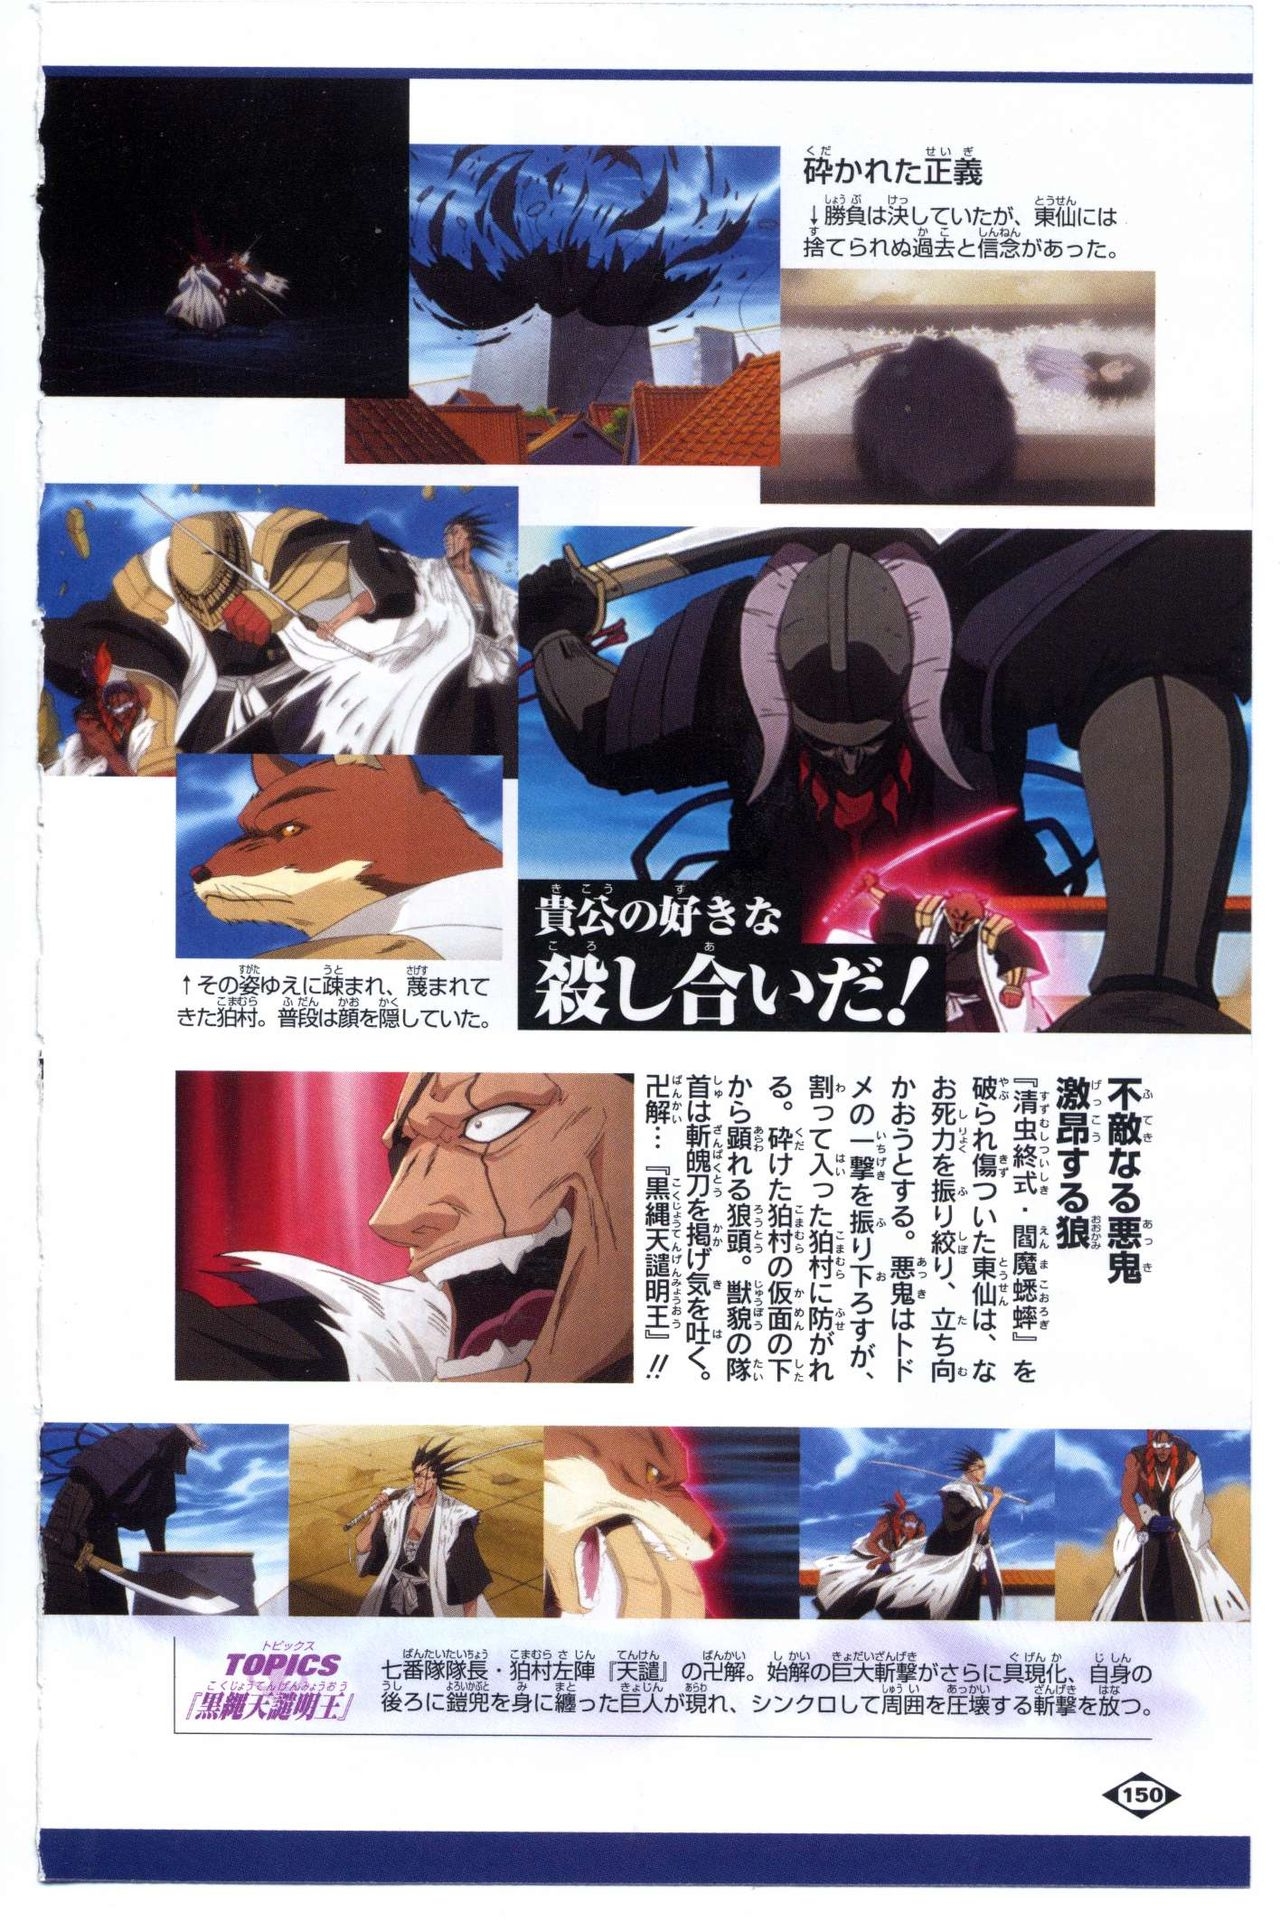 Bleach: Official Animation Book VIBEs 150